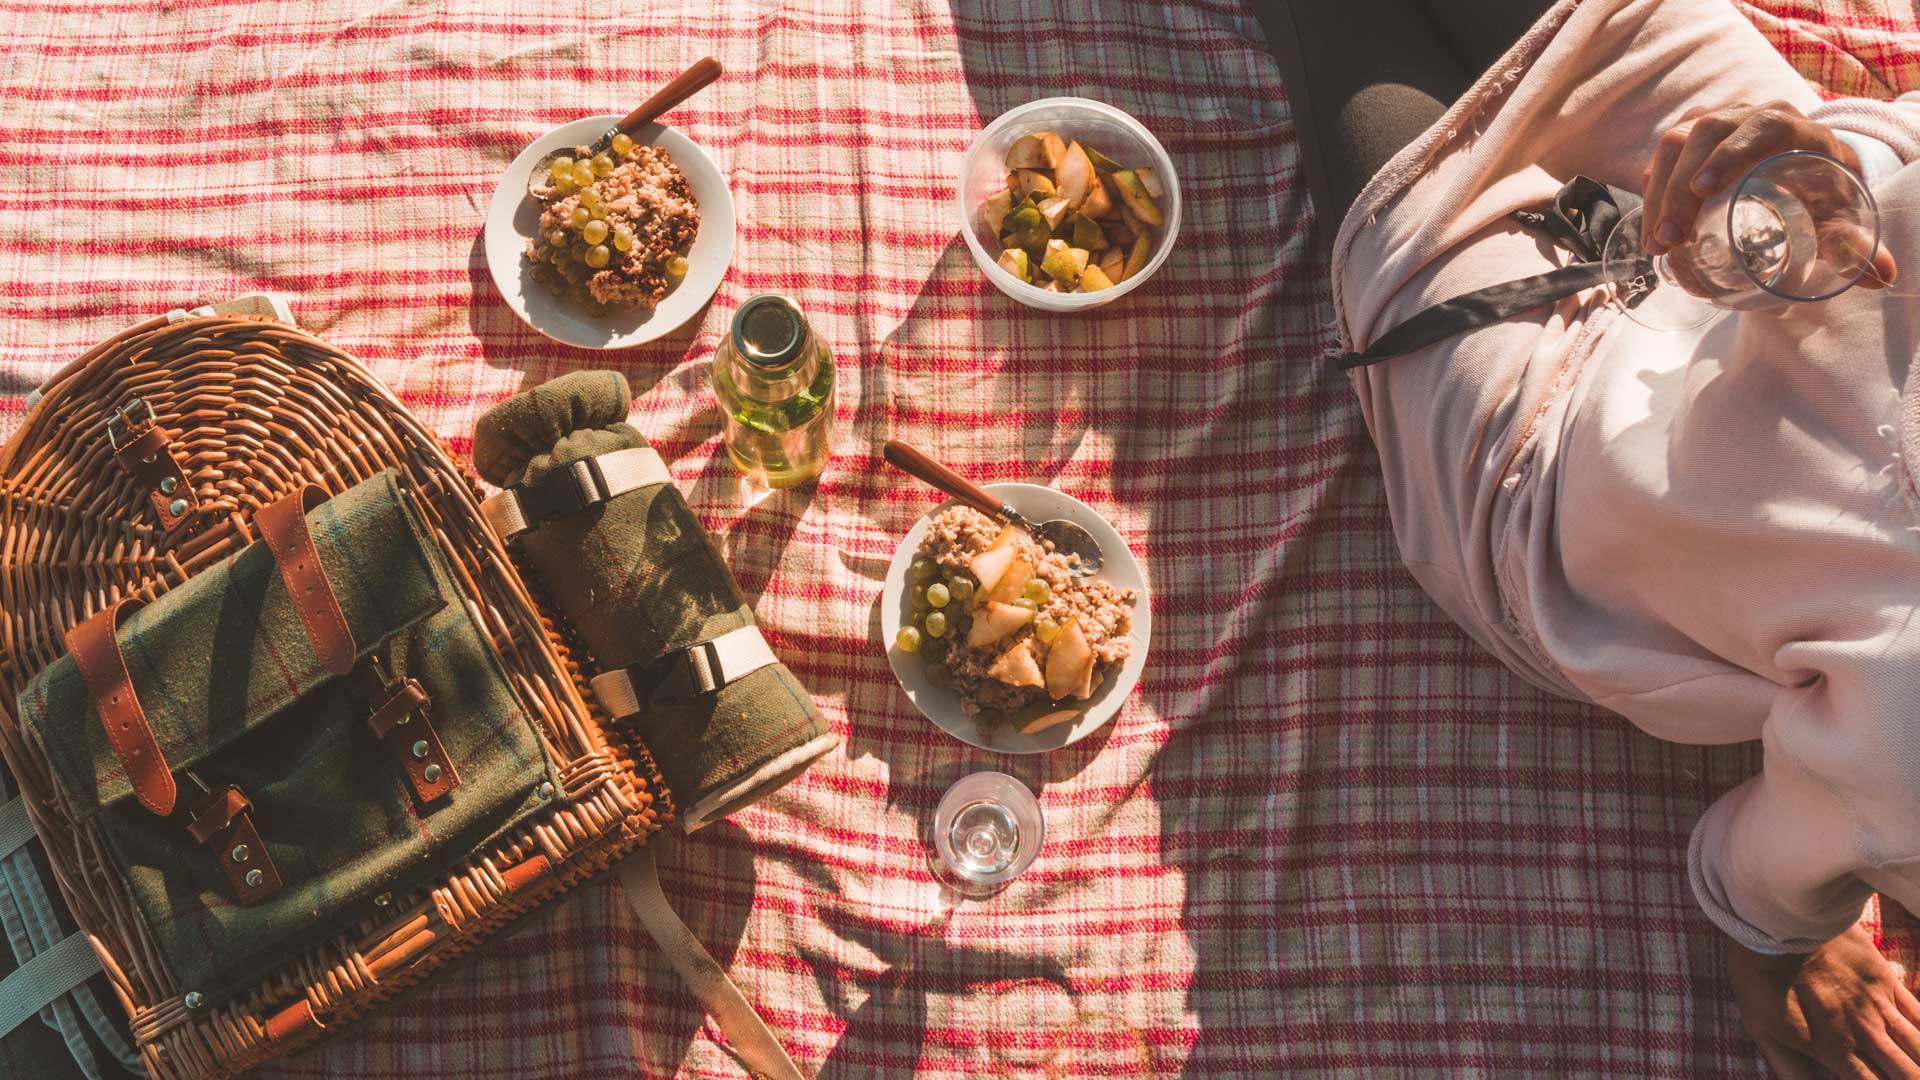 Eleven Classic Picnic Spots to Try Around Auckland This Summer